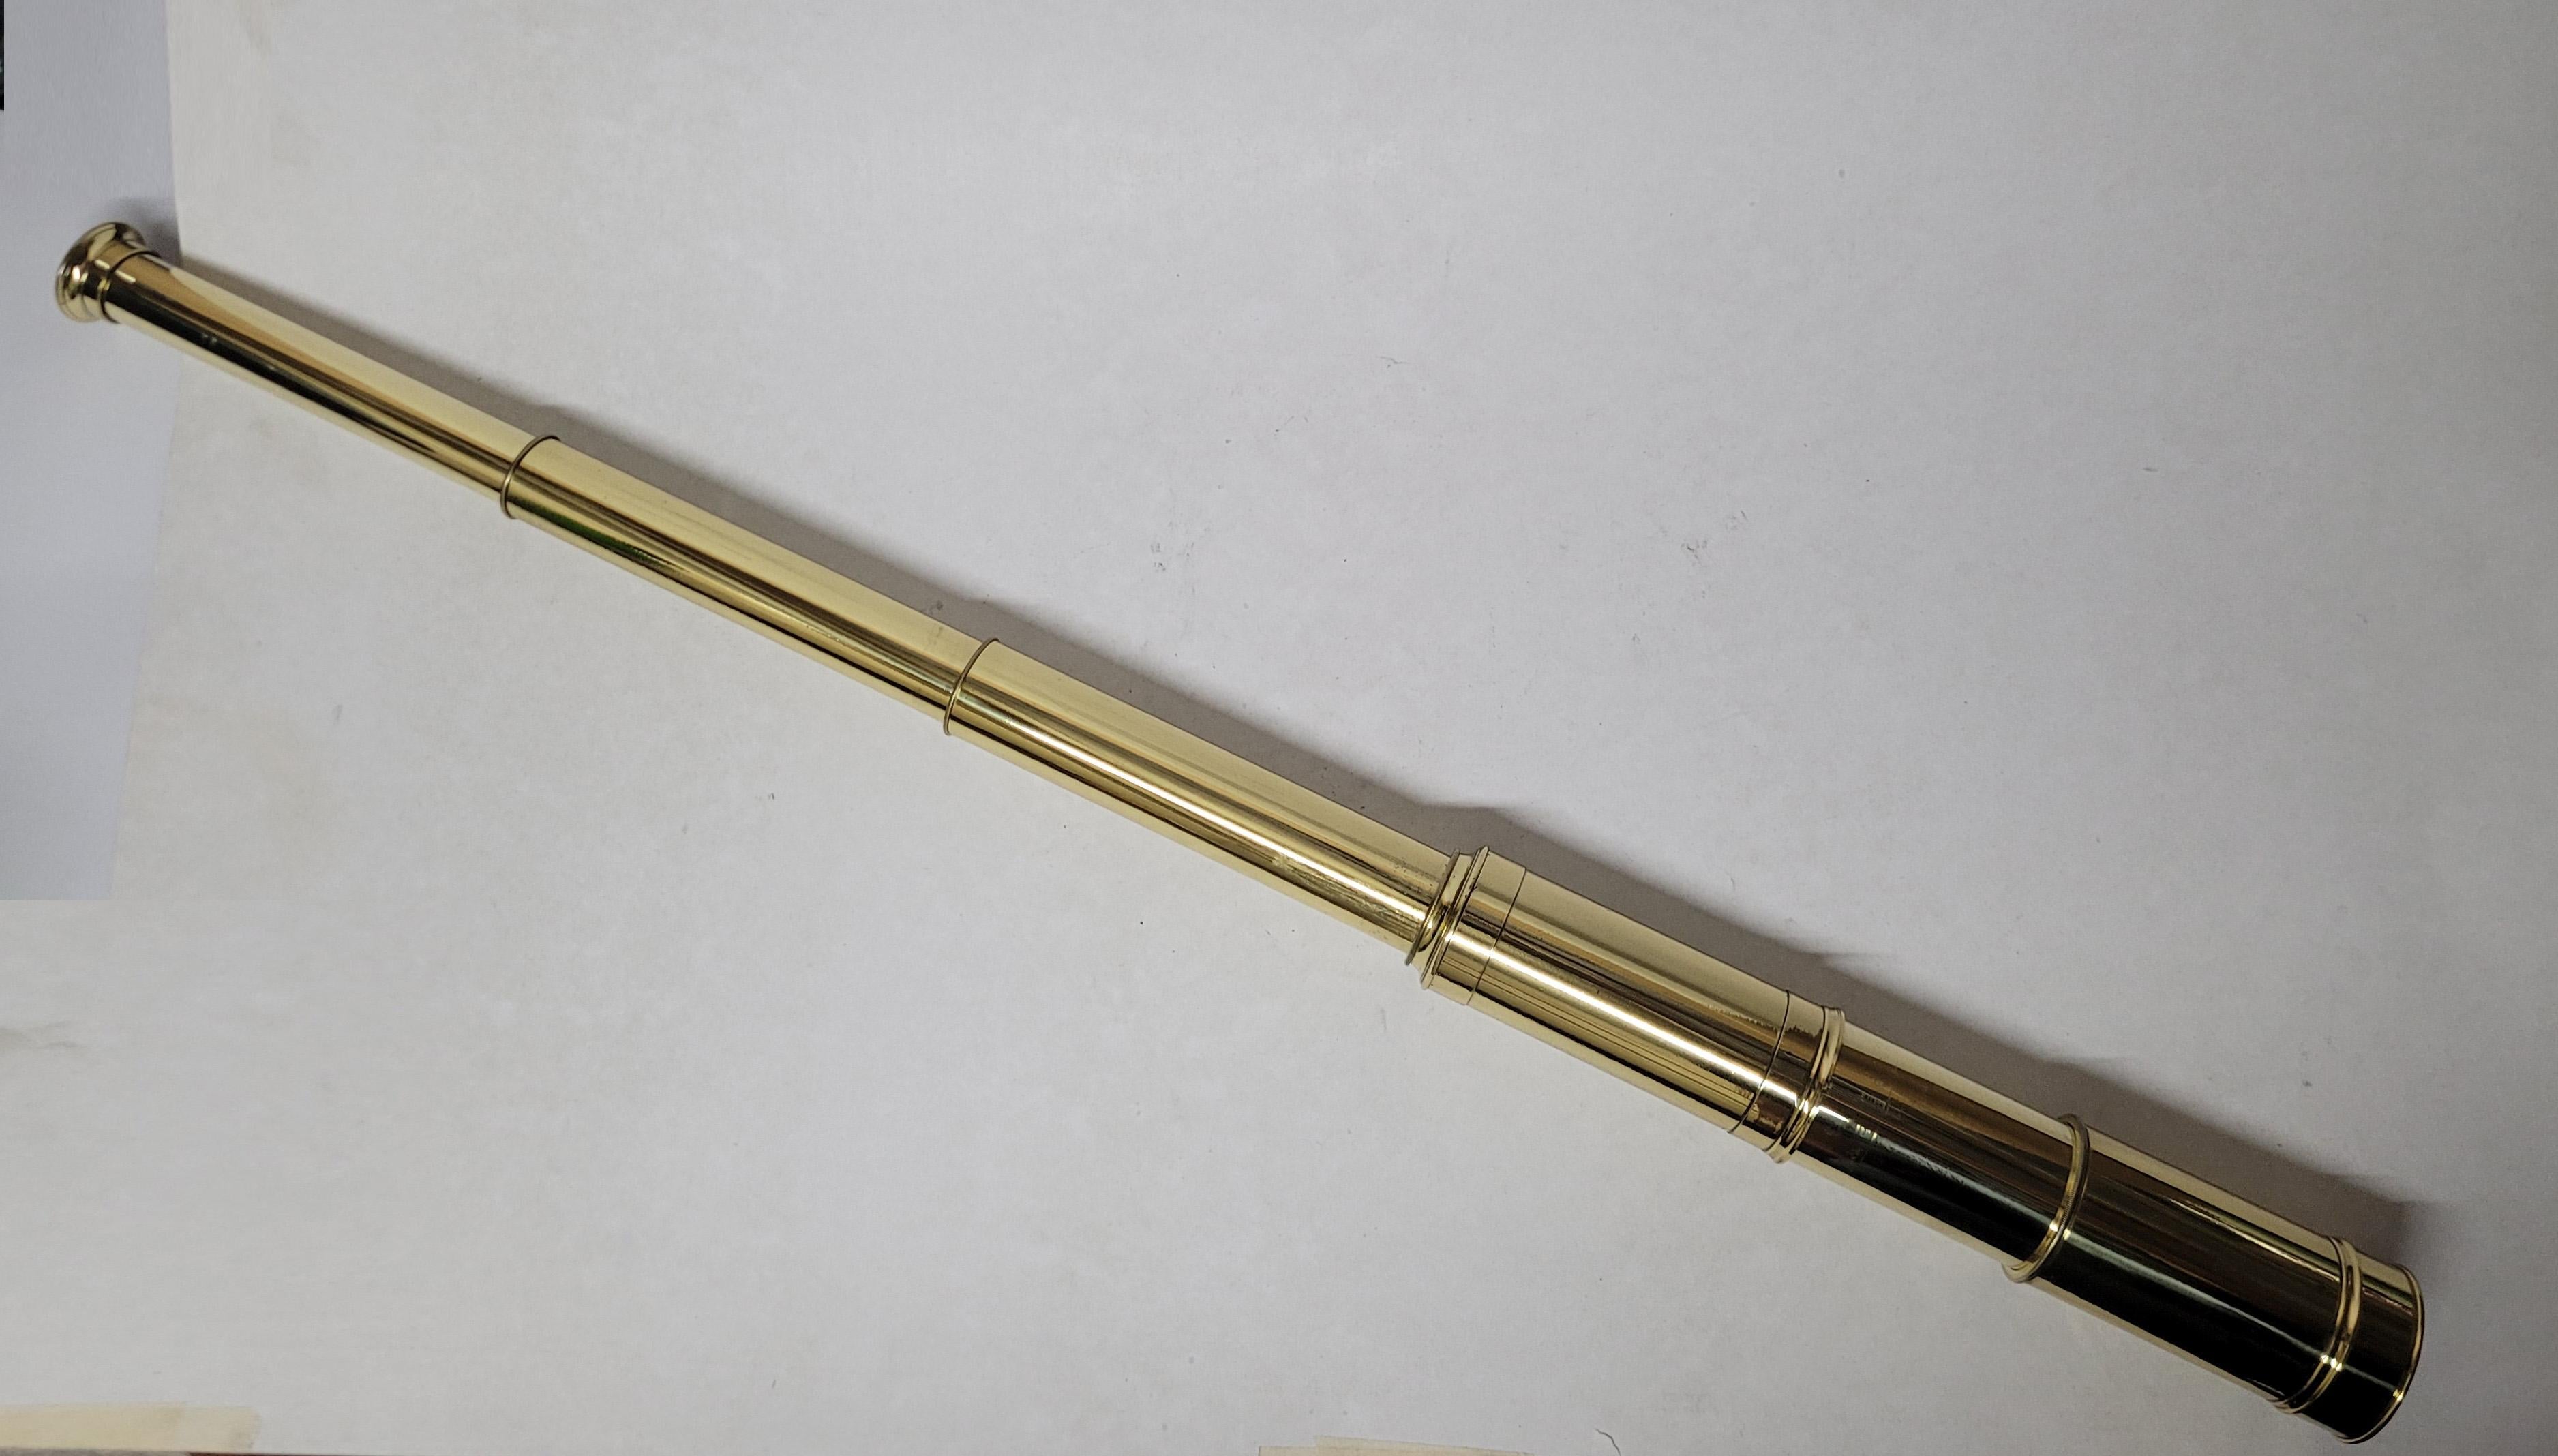 Ships spyglass telescope appropriate for use on a yacht, ship, or anywhere with a view. This has been meticulously polished and lacquered. We just restored a great collection of these. This fine instrument has a two draw barrel of solid brass. Also